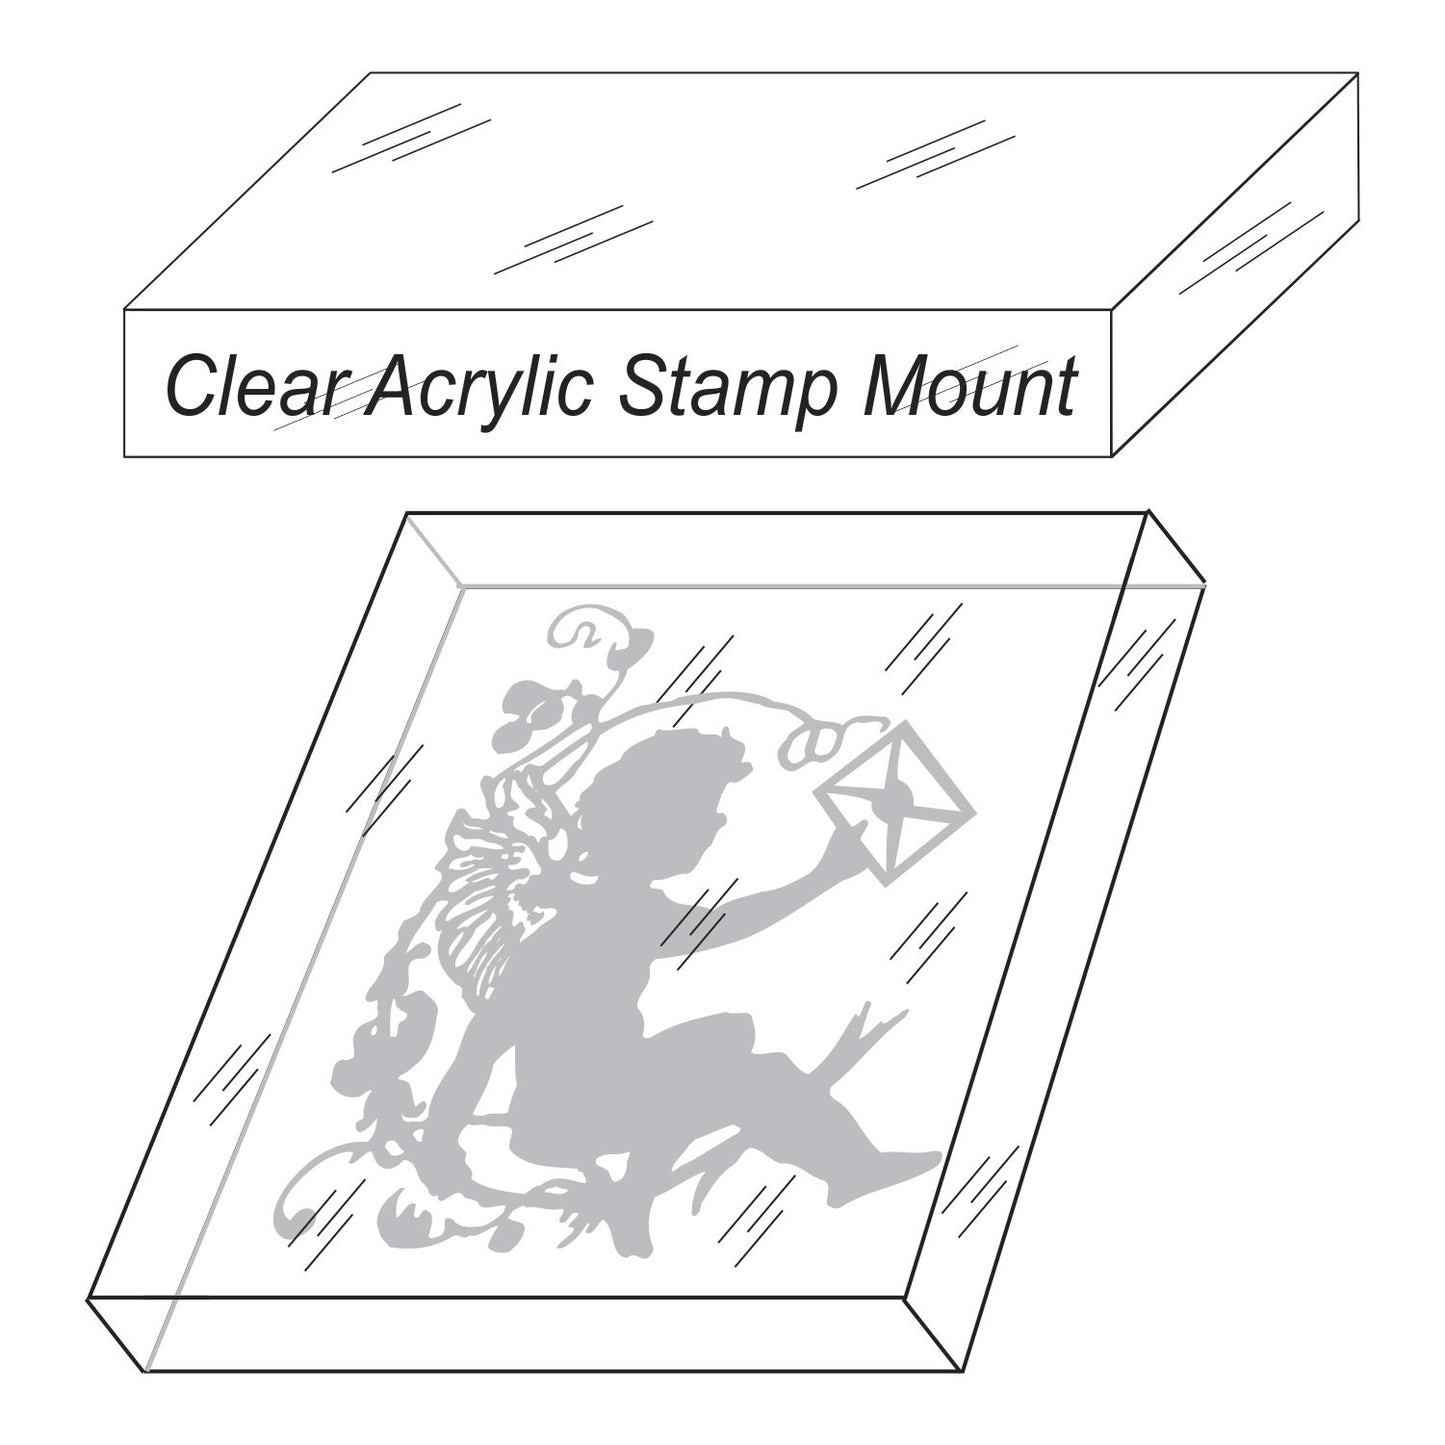 Acrylic Clear Stamp Mounts, 8" Length